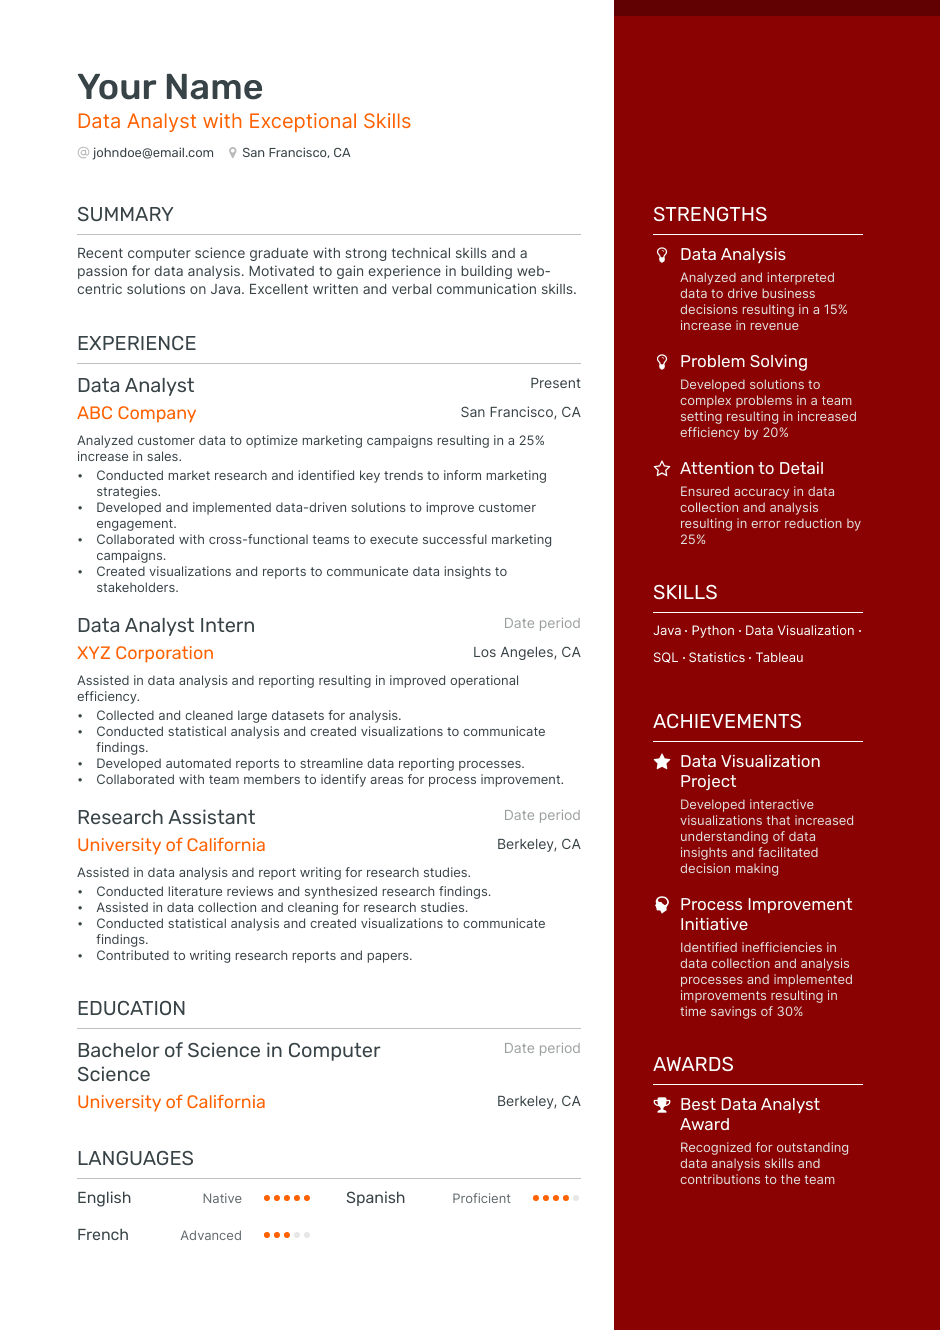 Data Analyst with Exceptional Skills resume example